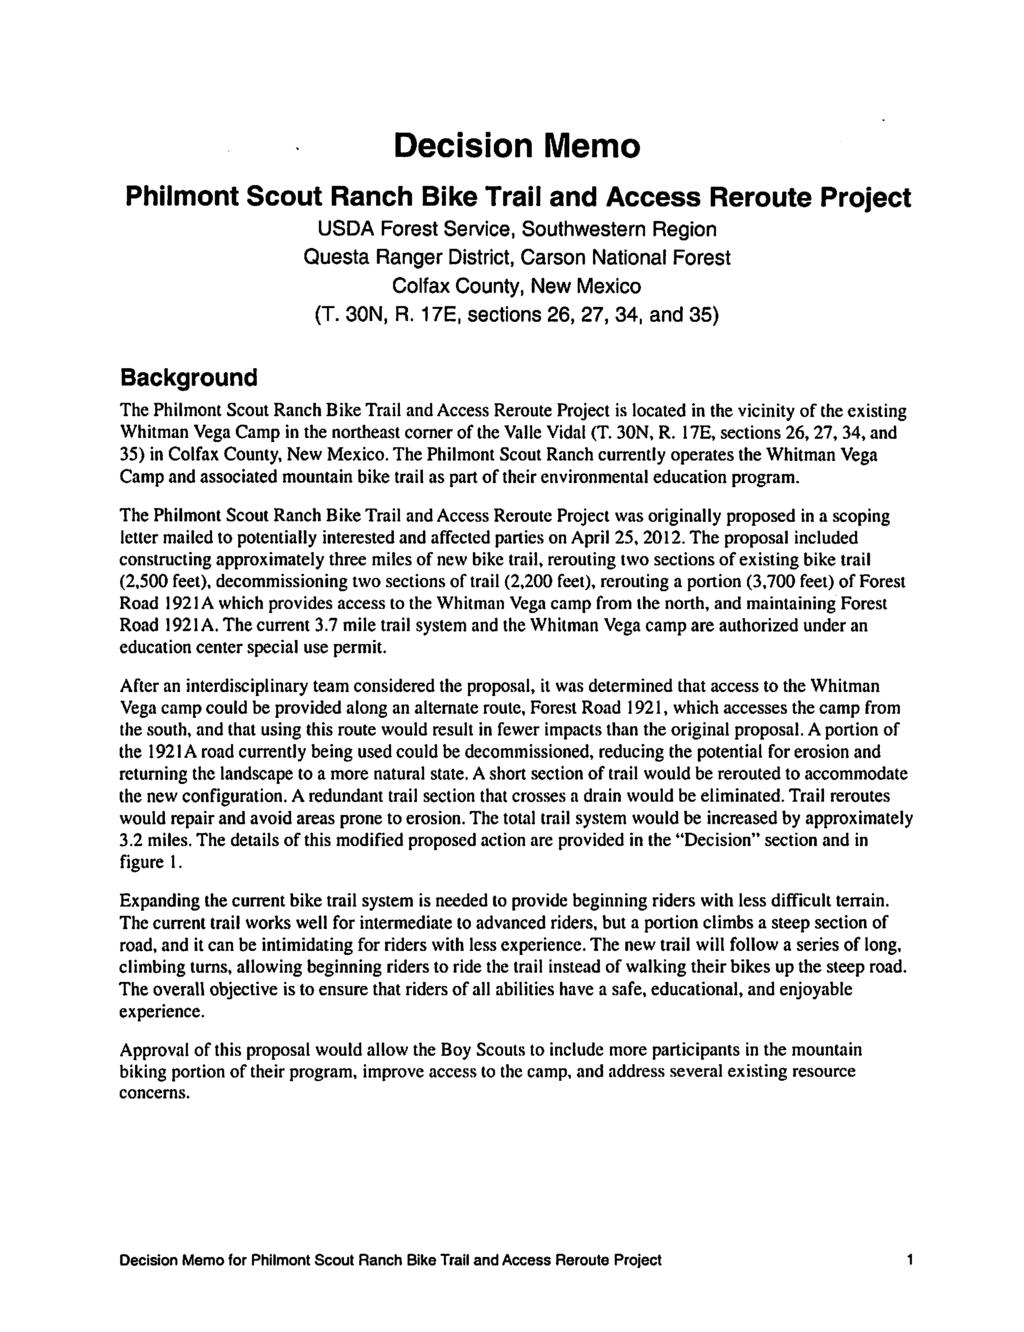 Decision Memo Philmont Scout Ranch Bike Trail and Access Reroute Project USDA Forest Service, Southwestern Region Questa Ranger District, Carson National Forest Colfax County, New Mexico (T. 30N, R.